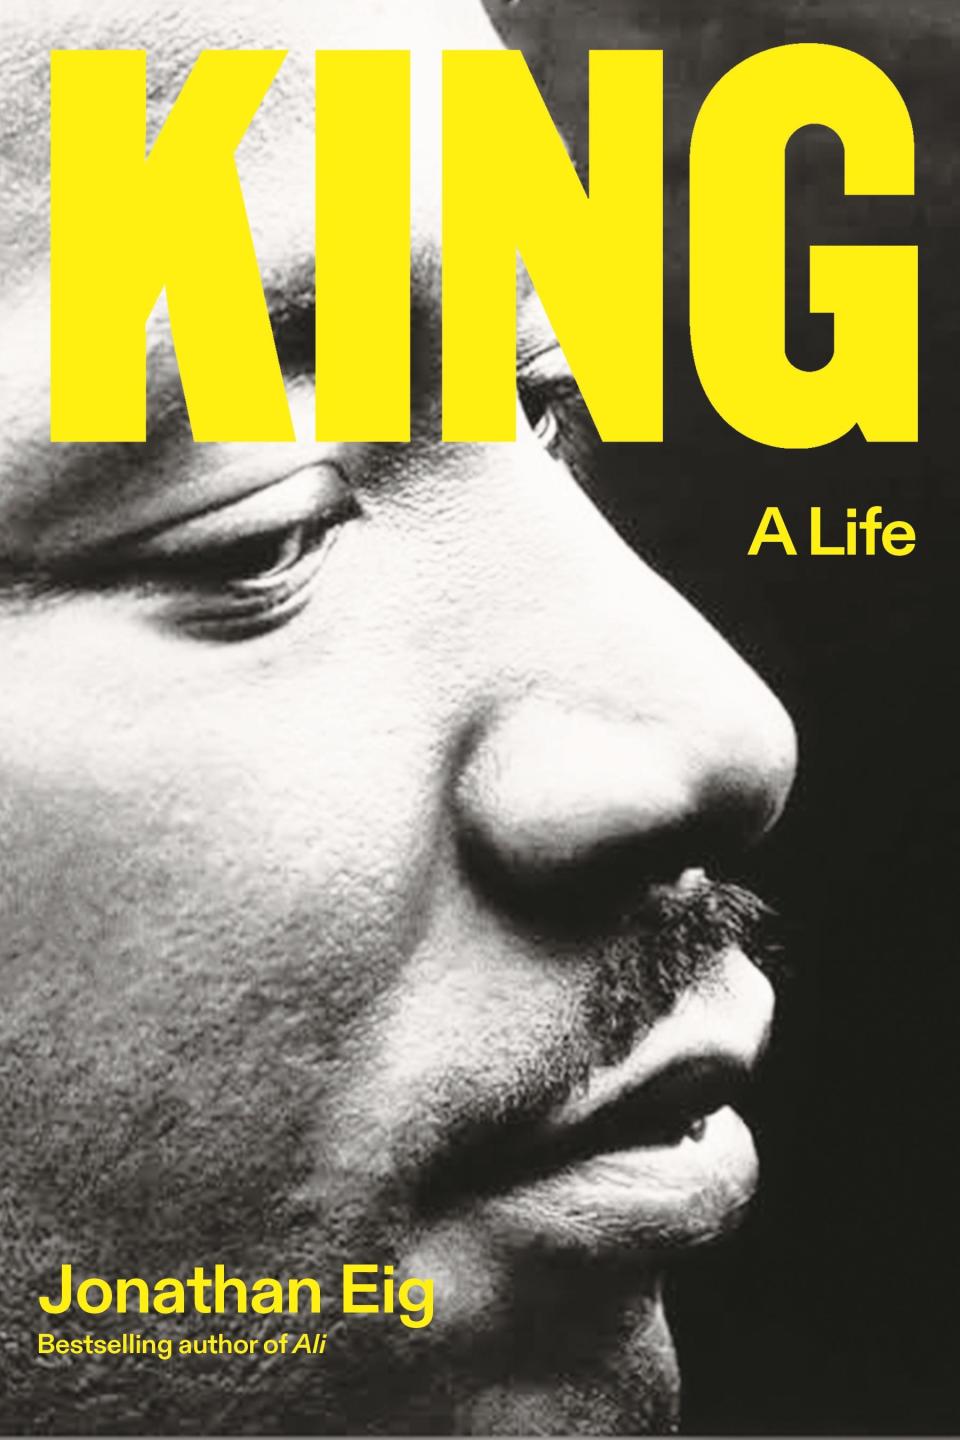 Jonathan Eig told The Journal News last August that he wanted, in "King: A Life," to present the slain civil rights leader "warts and all." He worried that some people might protest. "But that has not been the case. And I feel really gratified about that," he said. The biography has been named the 2024 winner of the Pulitzer Prize in Biography.